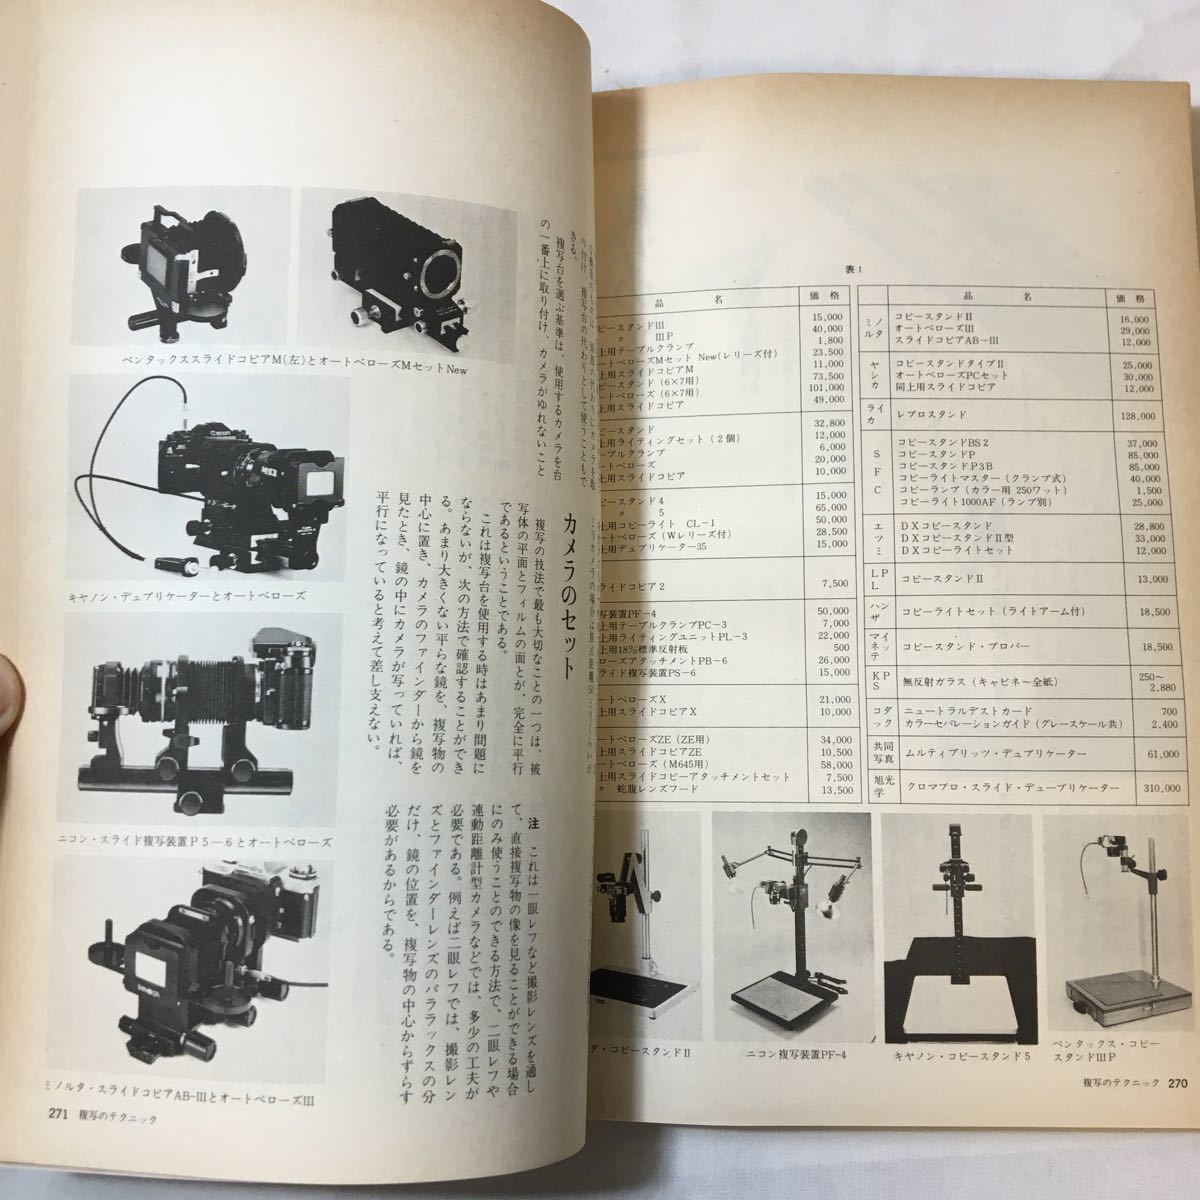 zaa-358! camera every day separate volume photograph course 8 practice compilation Ⅳ.. special color photograph every day newspaper company 1982/5/1 out of print 